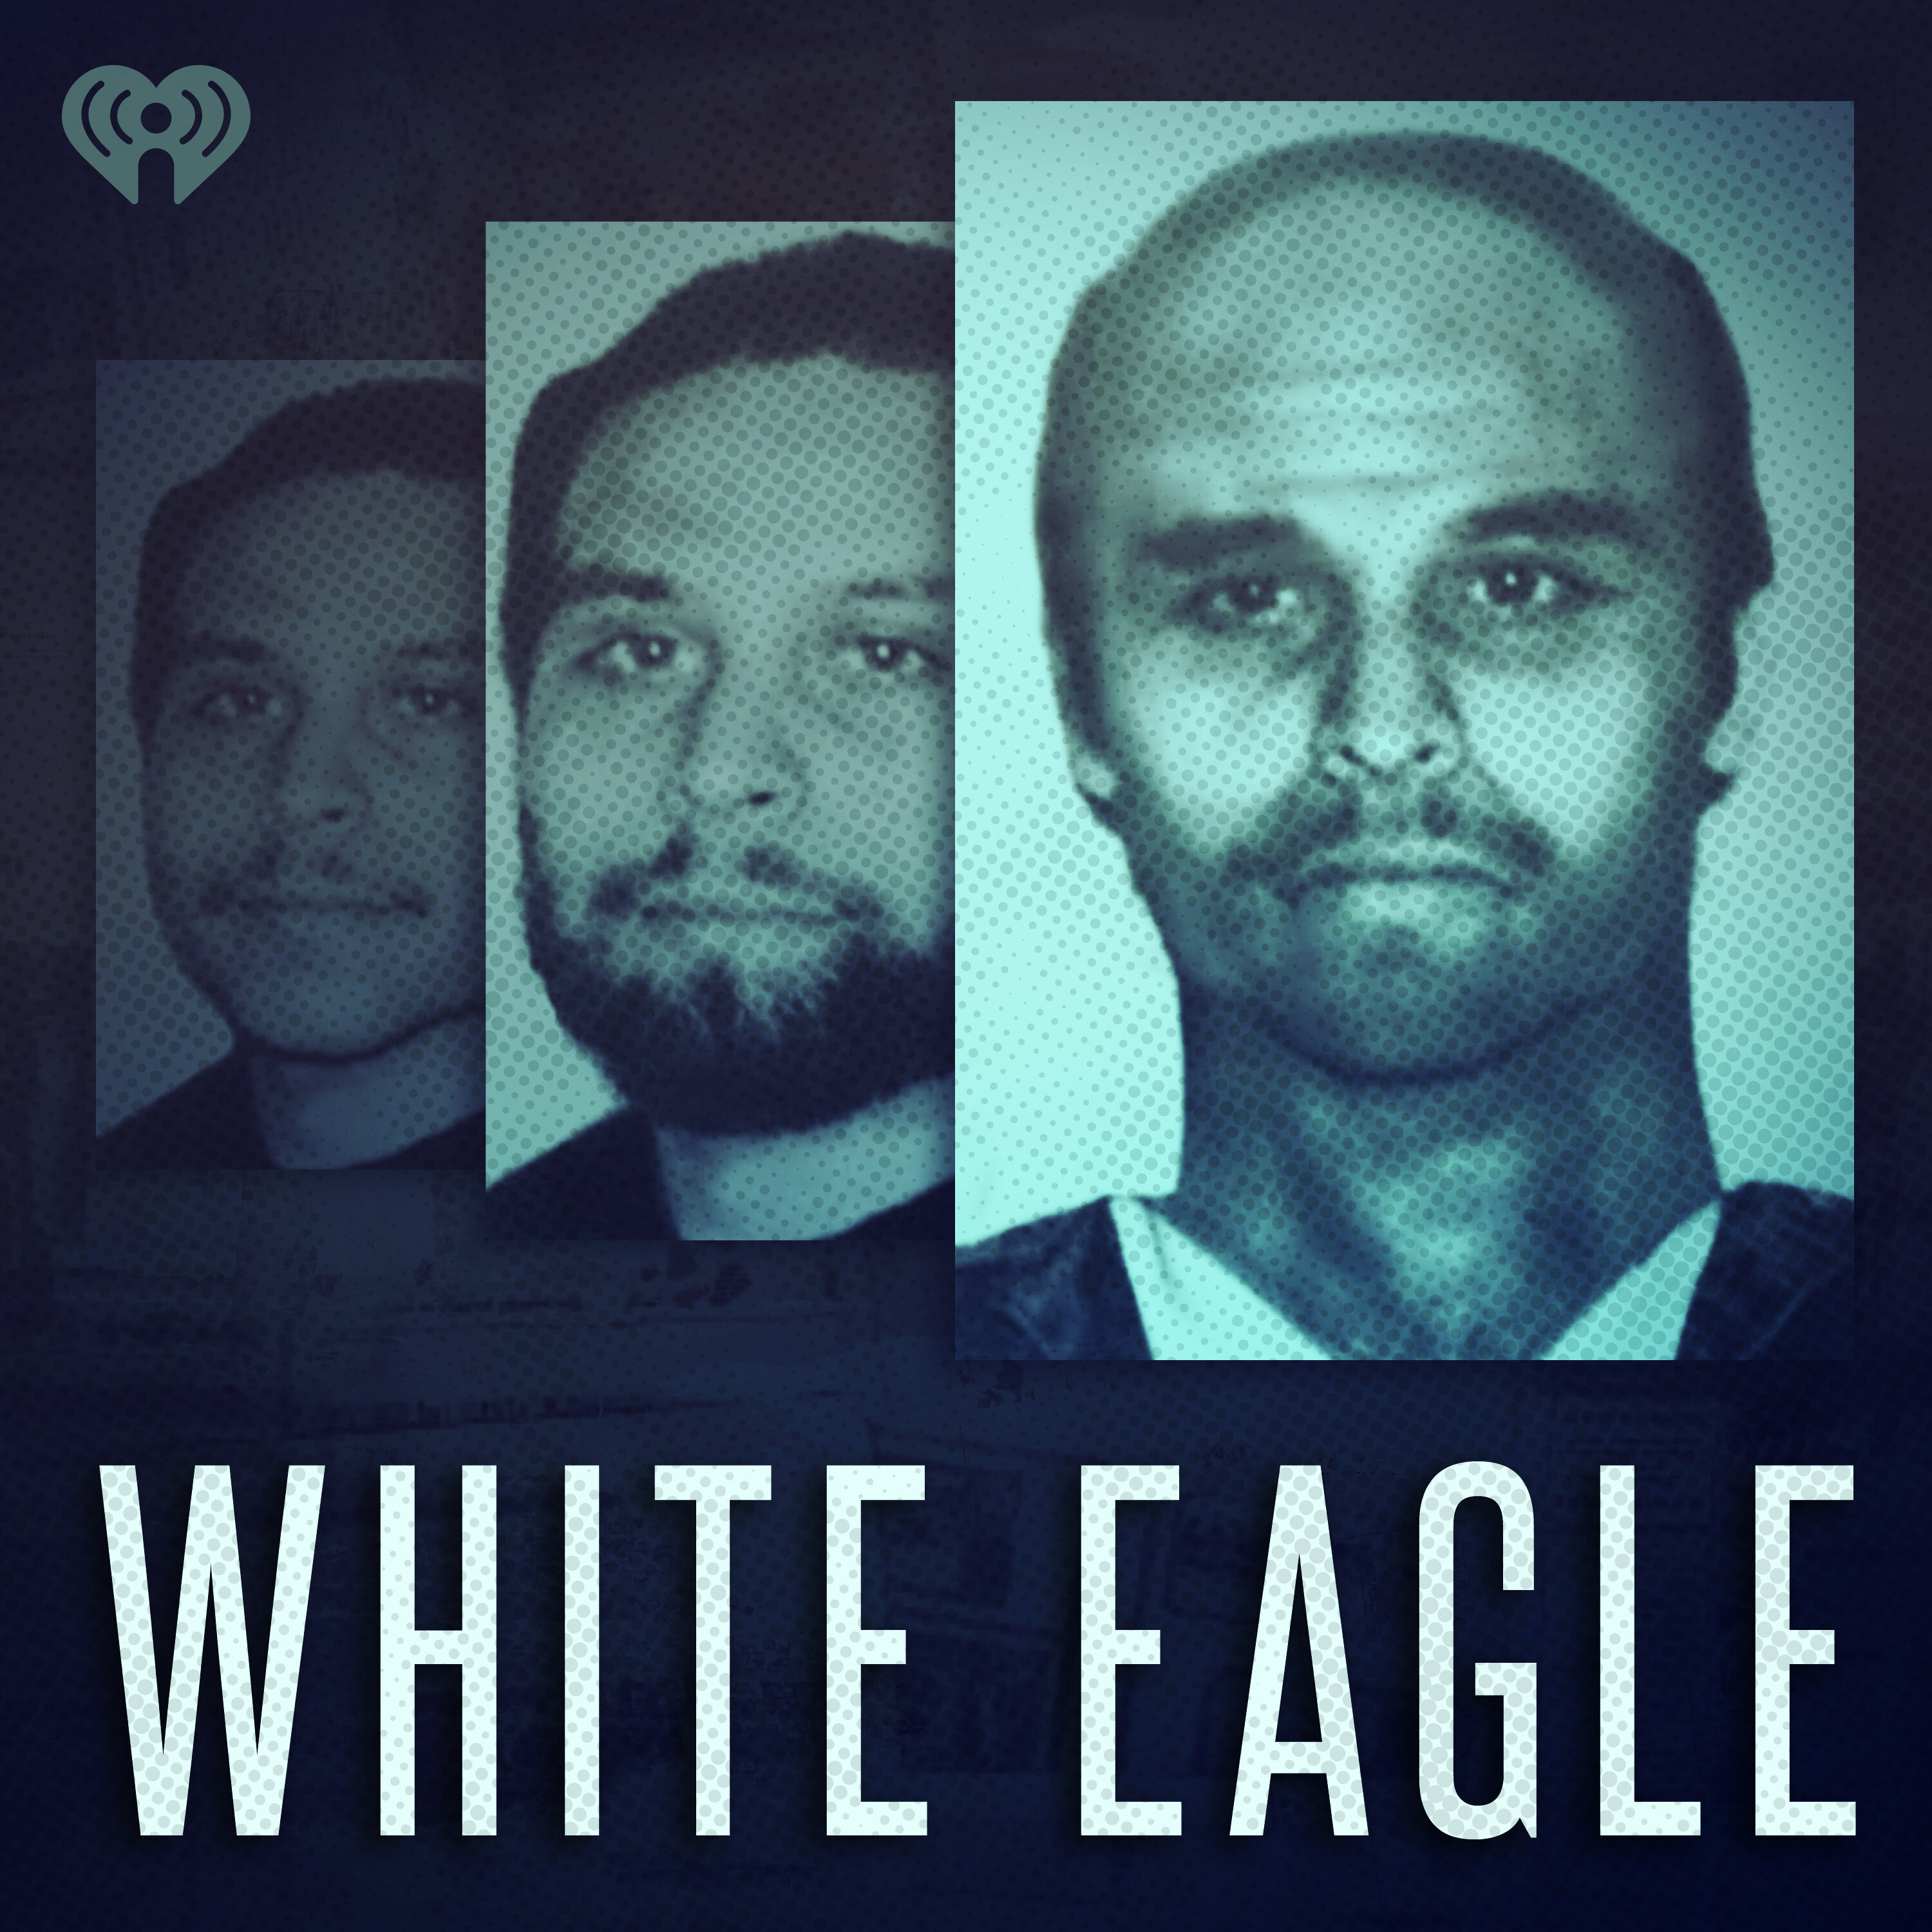 Introducing: White Eagle by iHeartPodcasts